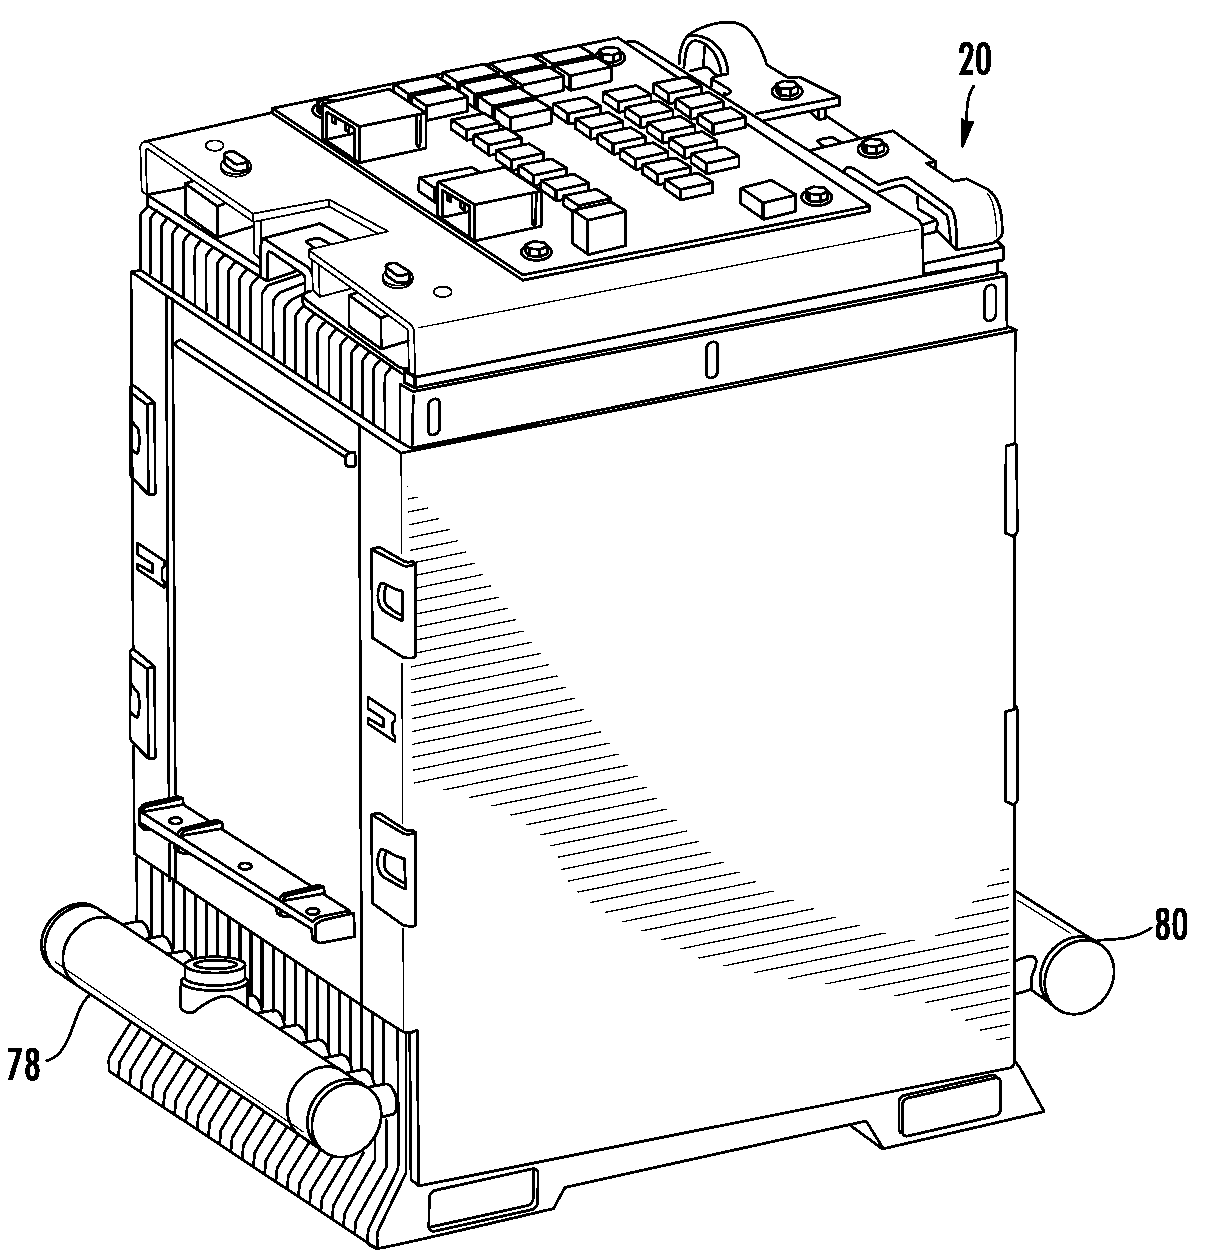 Battery Cell Assembly Having Heat Exchanger With Serpentine Flow Path